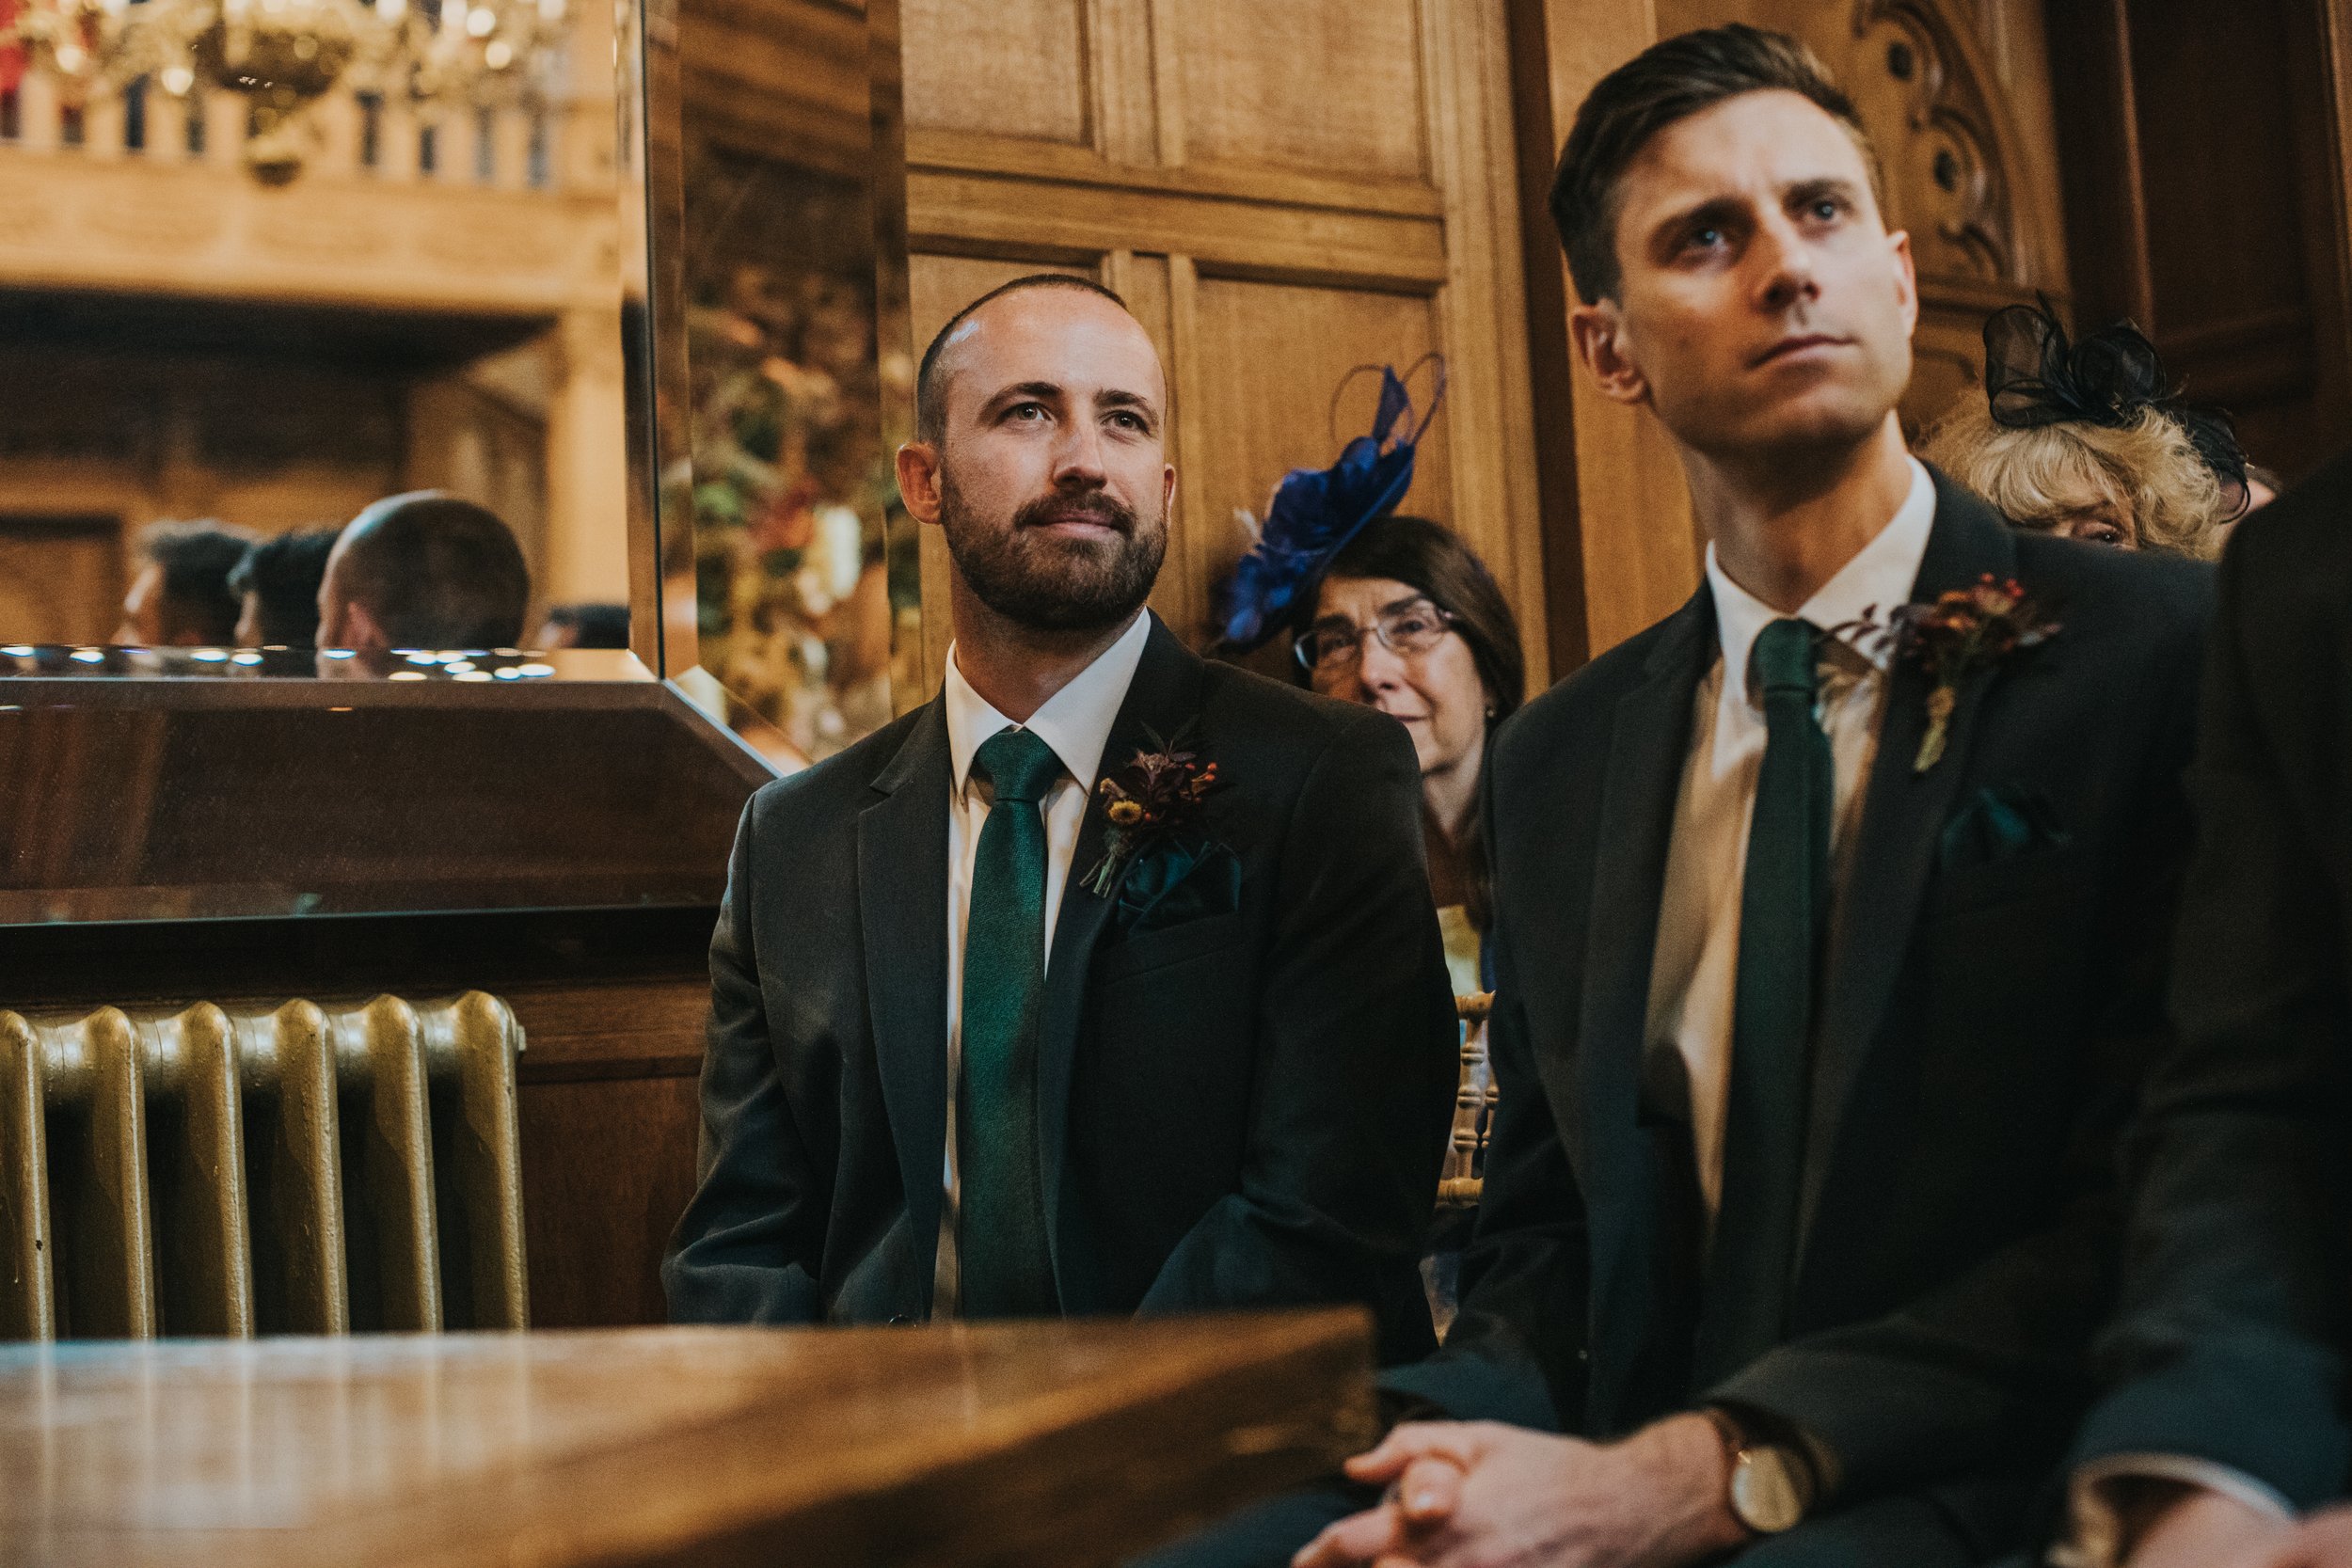 Groomsman watches the couple smiling